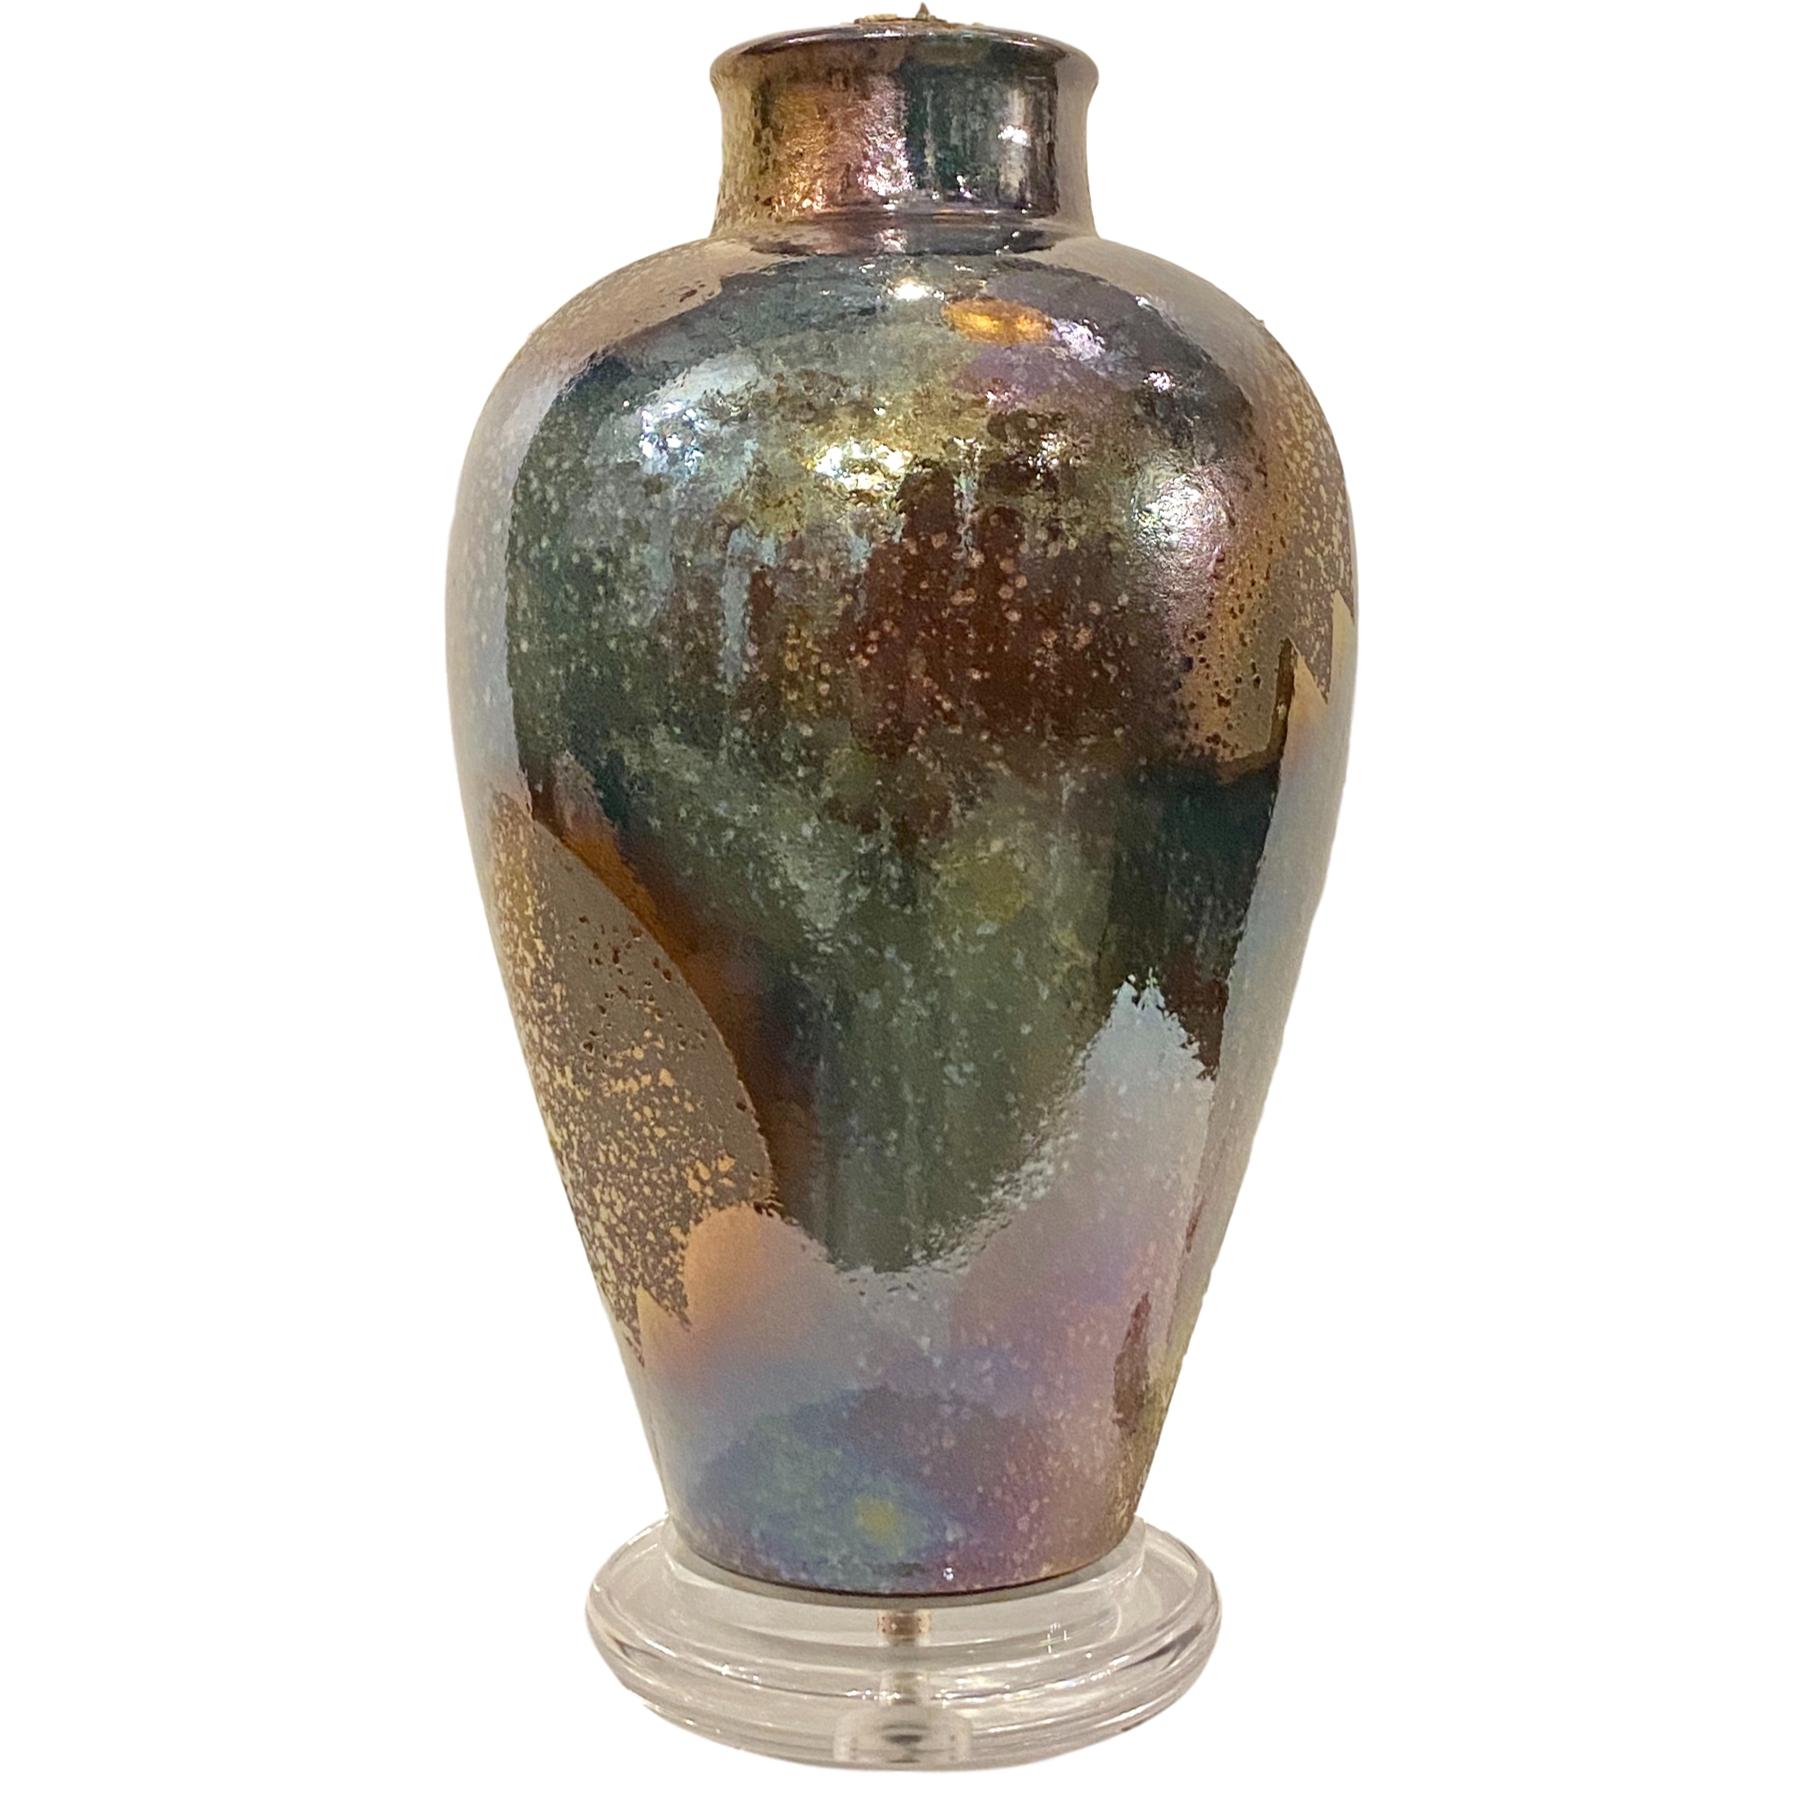 A single circa 1970s American iridescent-glazed ceramic table lamp.

Measurements:
Height of body 20